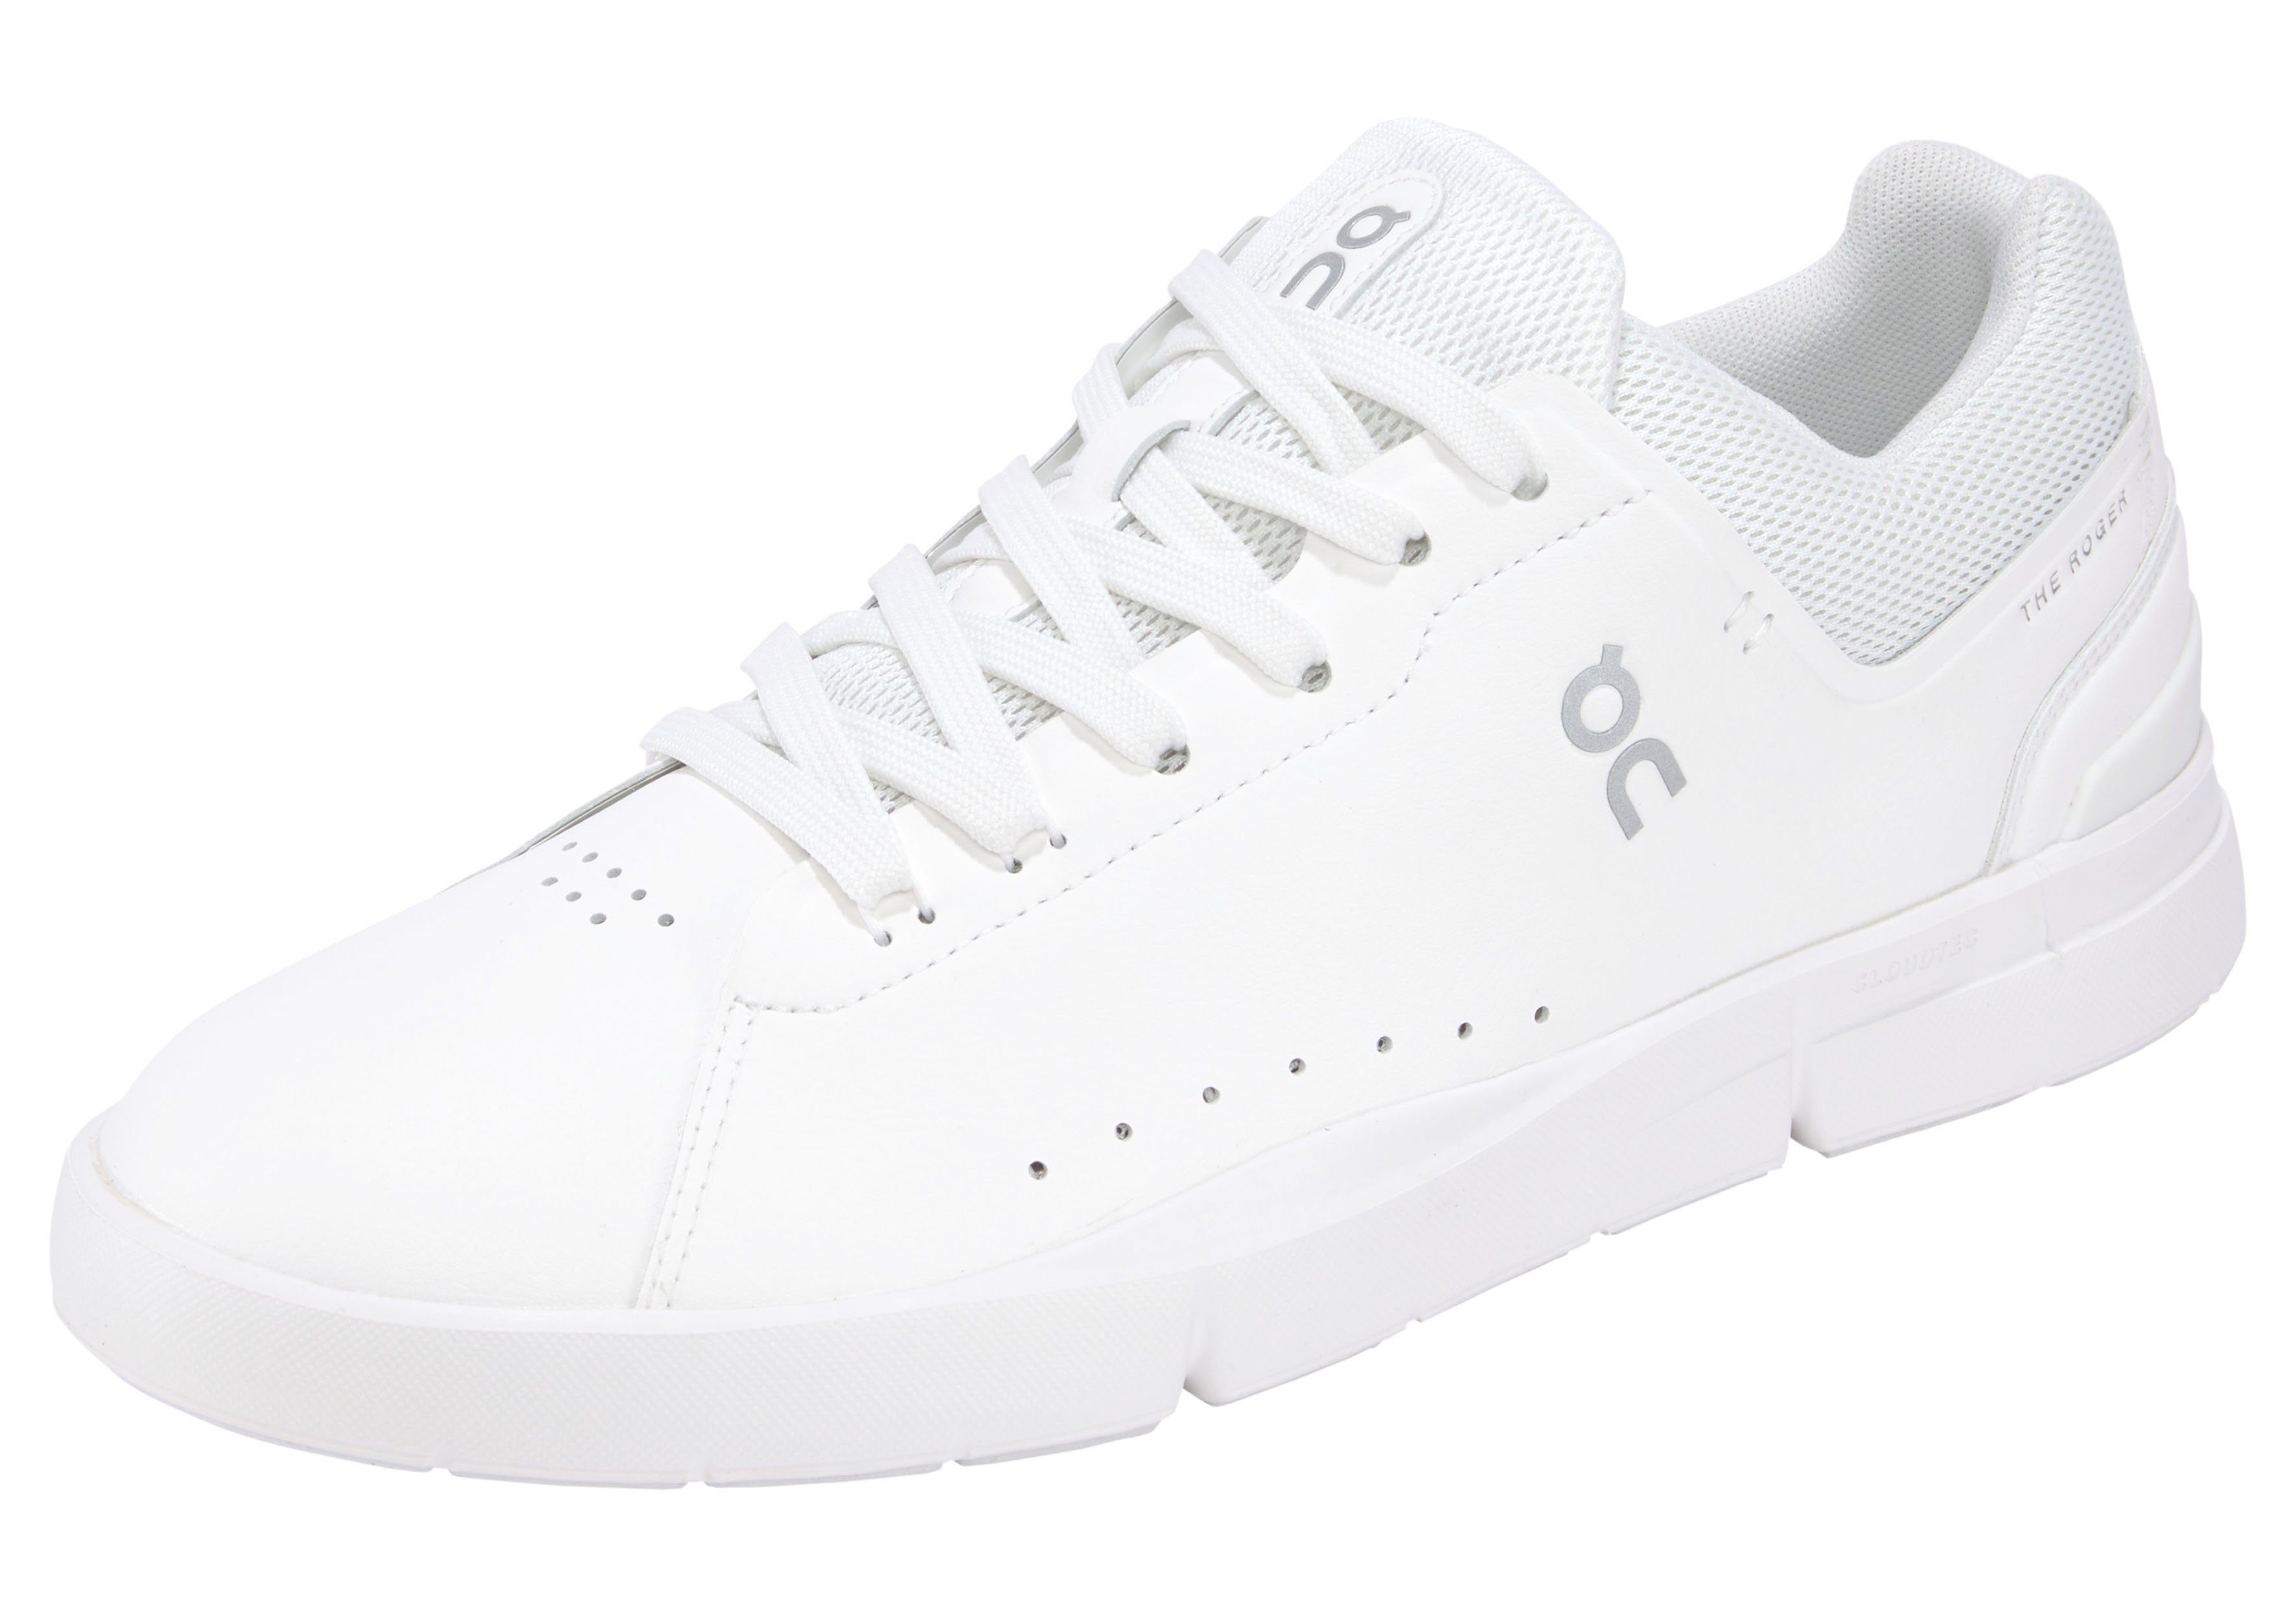 ON RUNNING THE ROGER Advantage Laufschuh 99456 All White